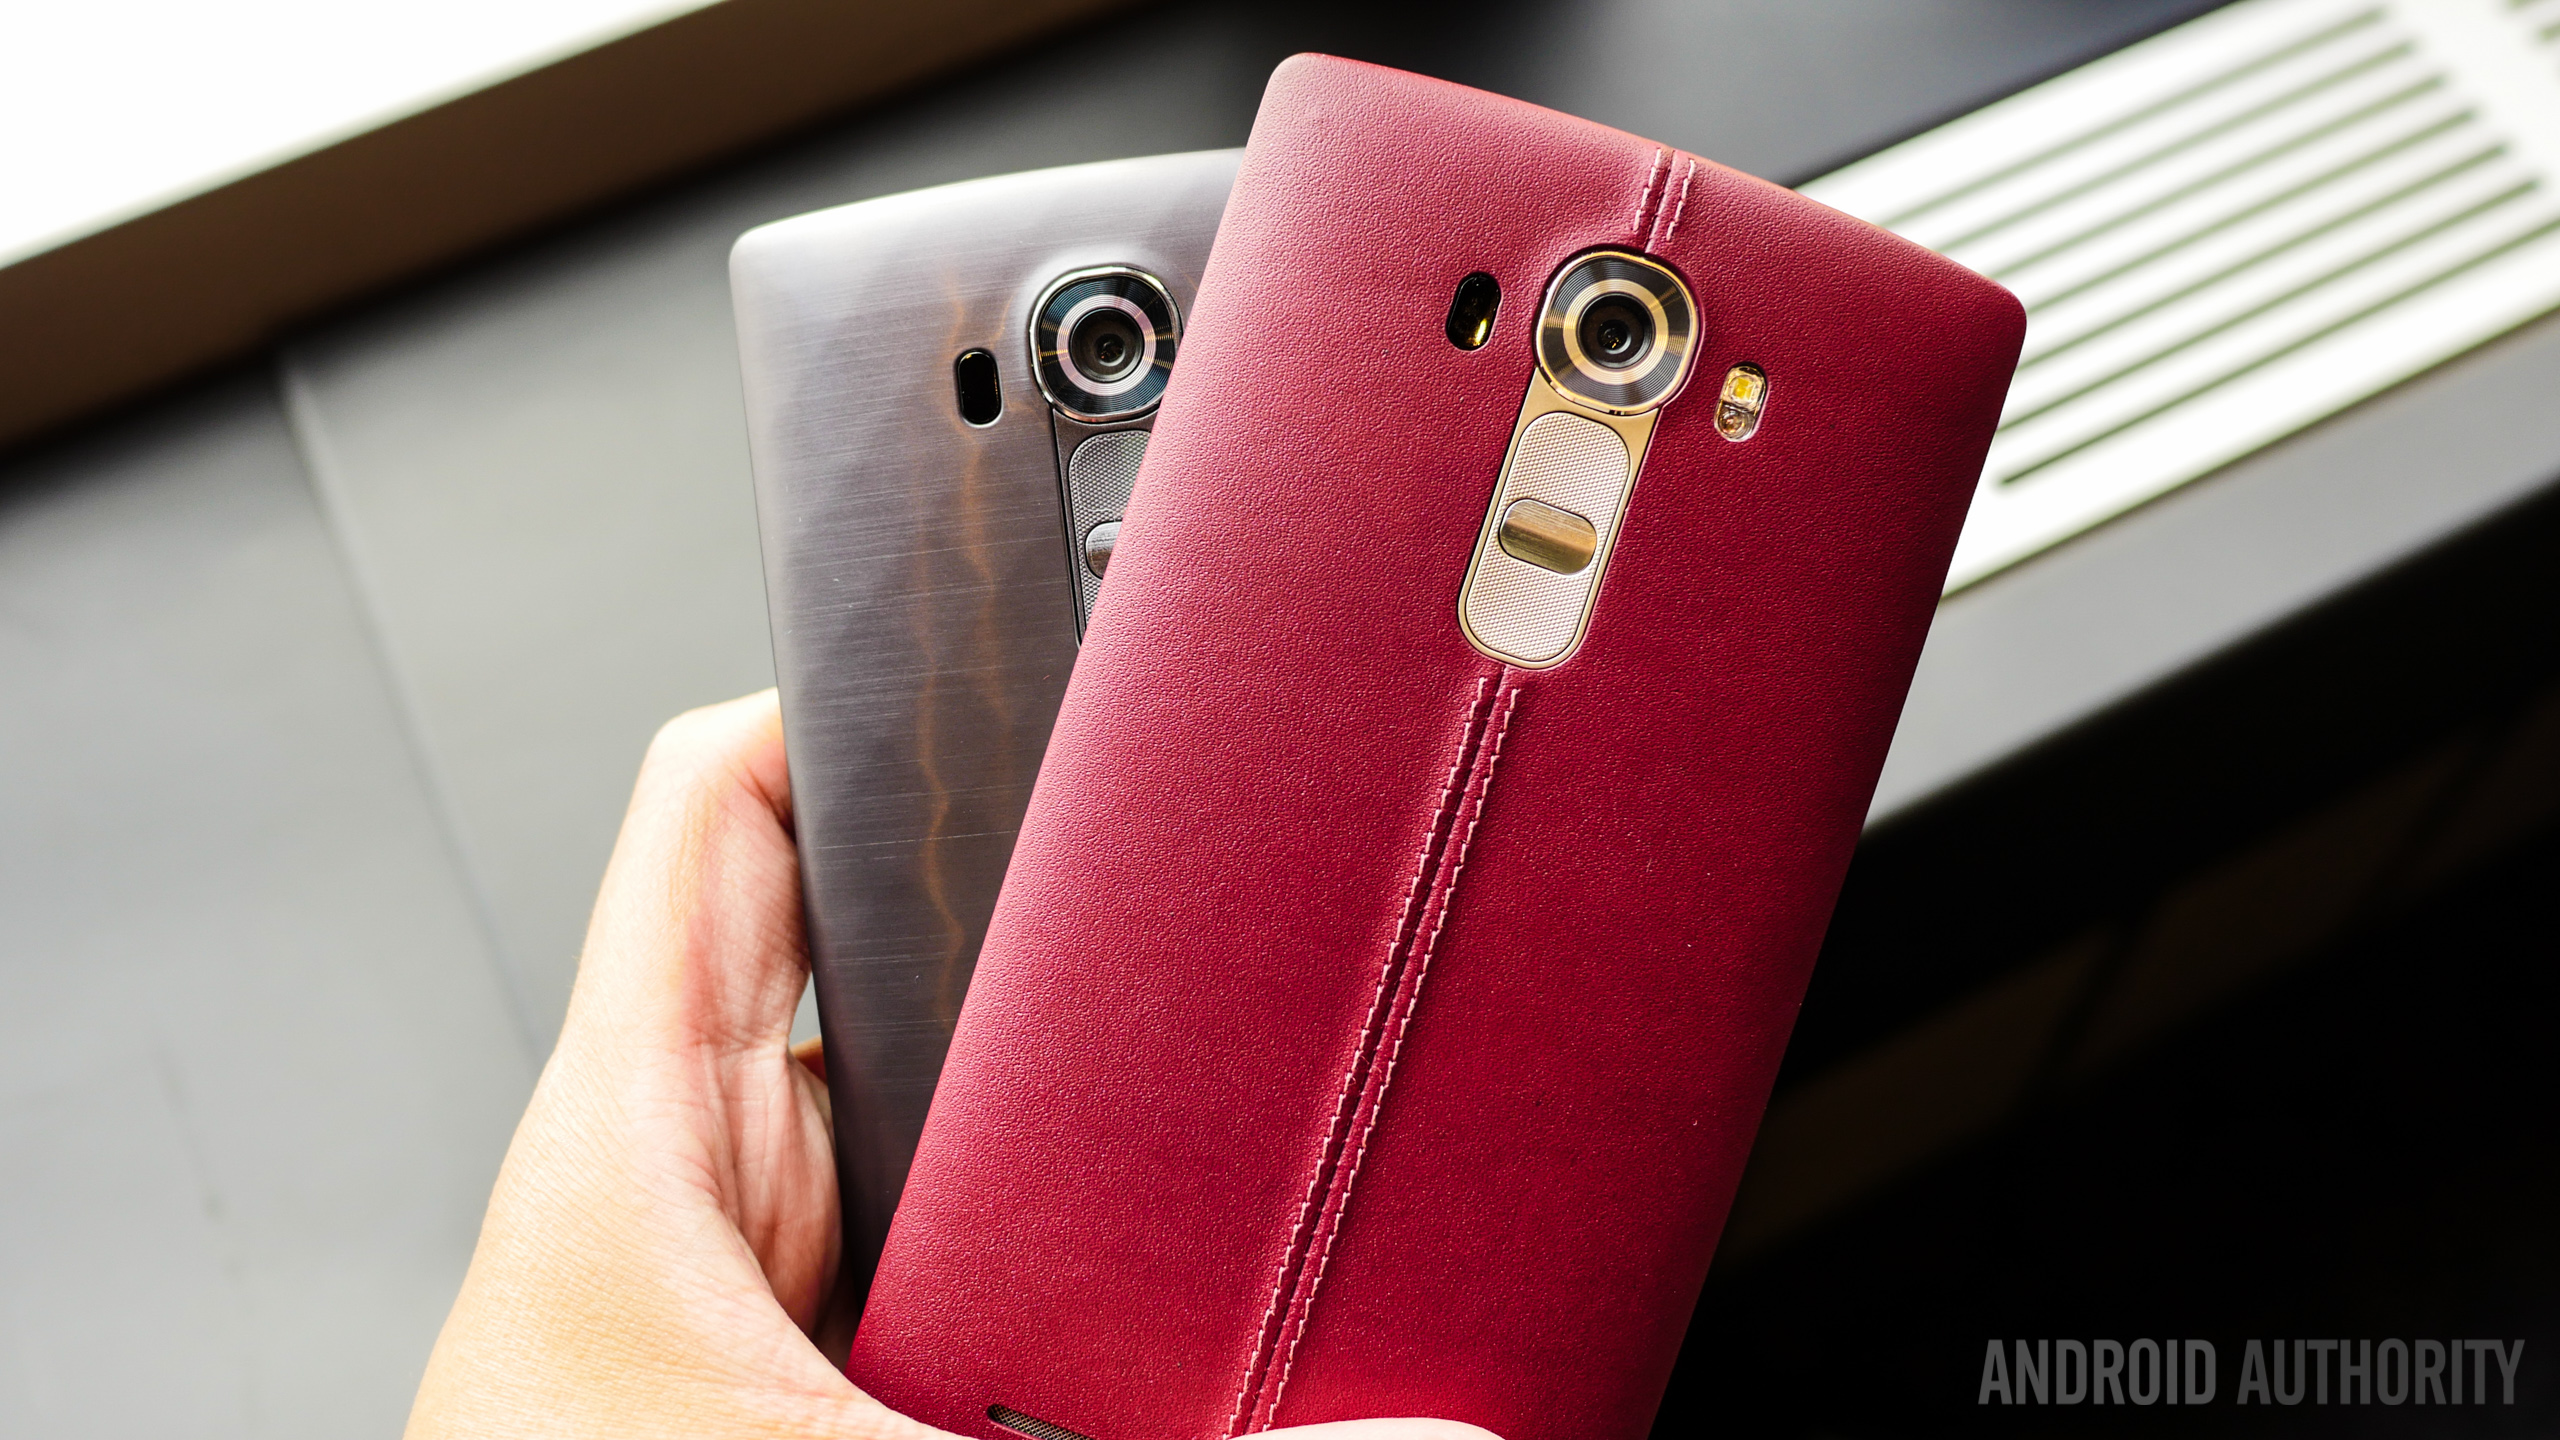 Buyers are not swayed by the G4's leather back